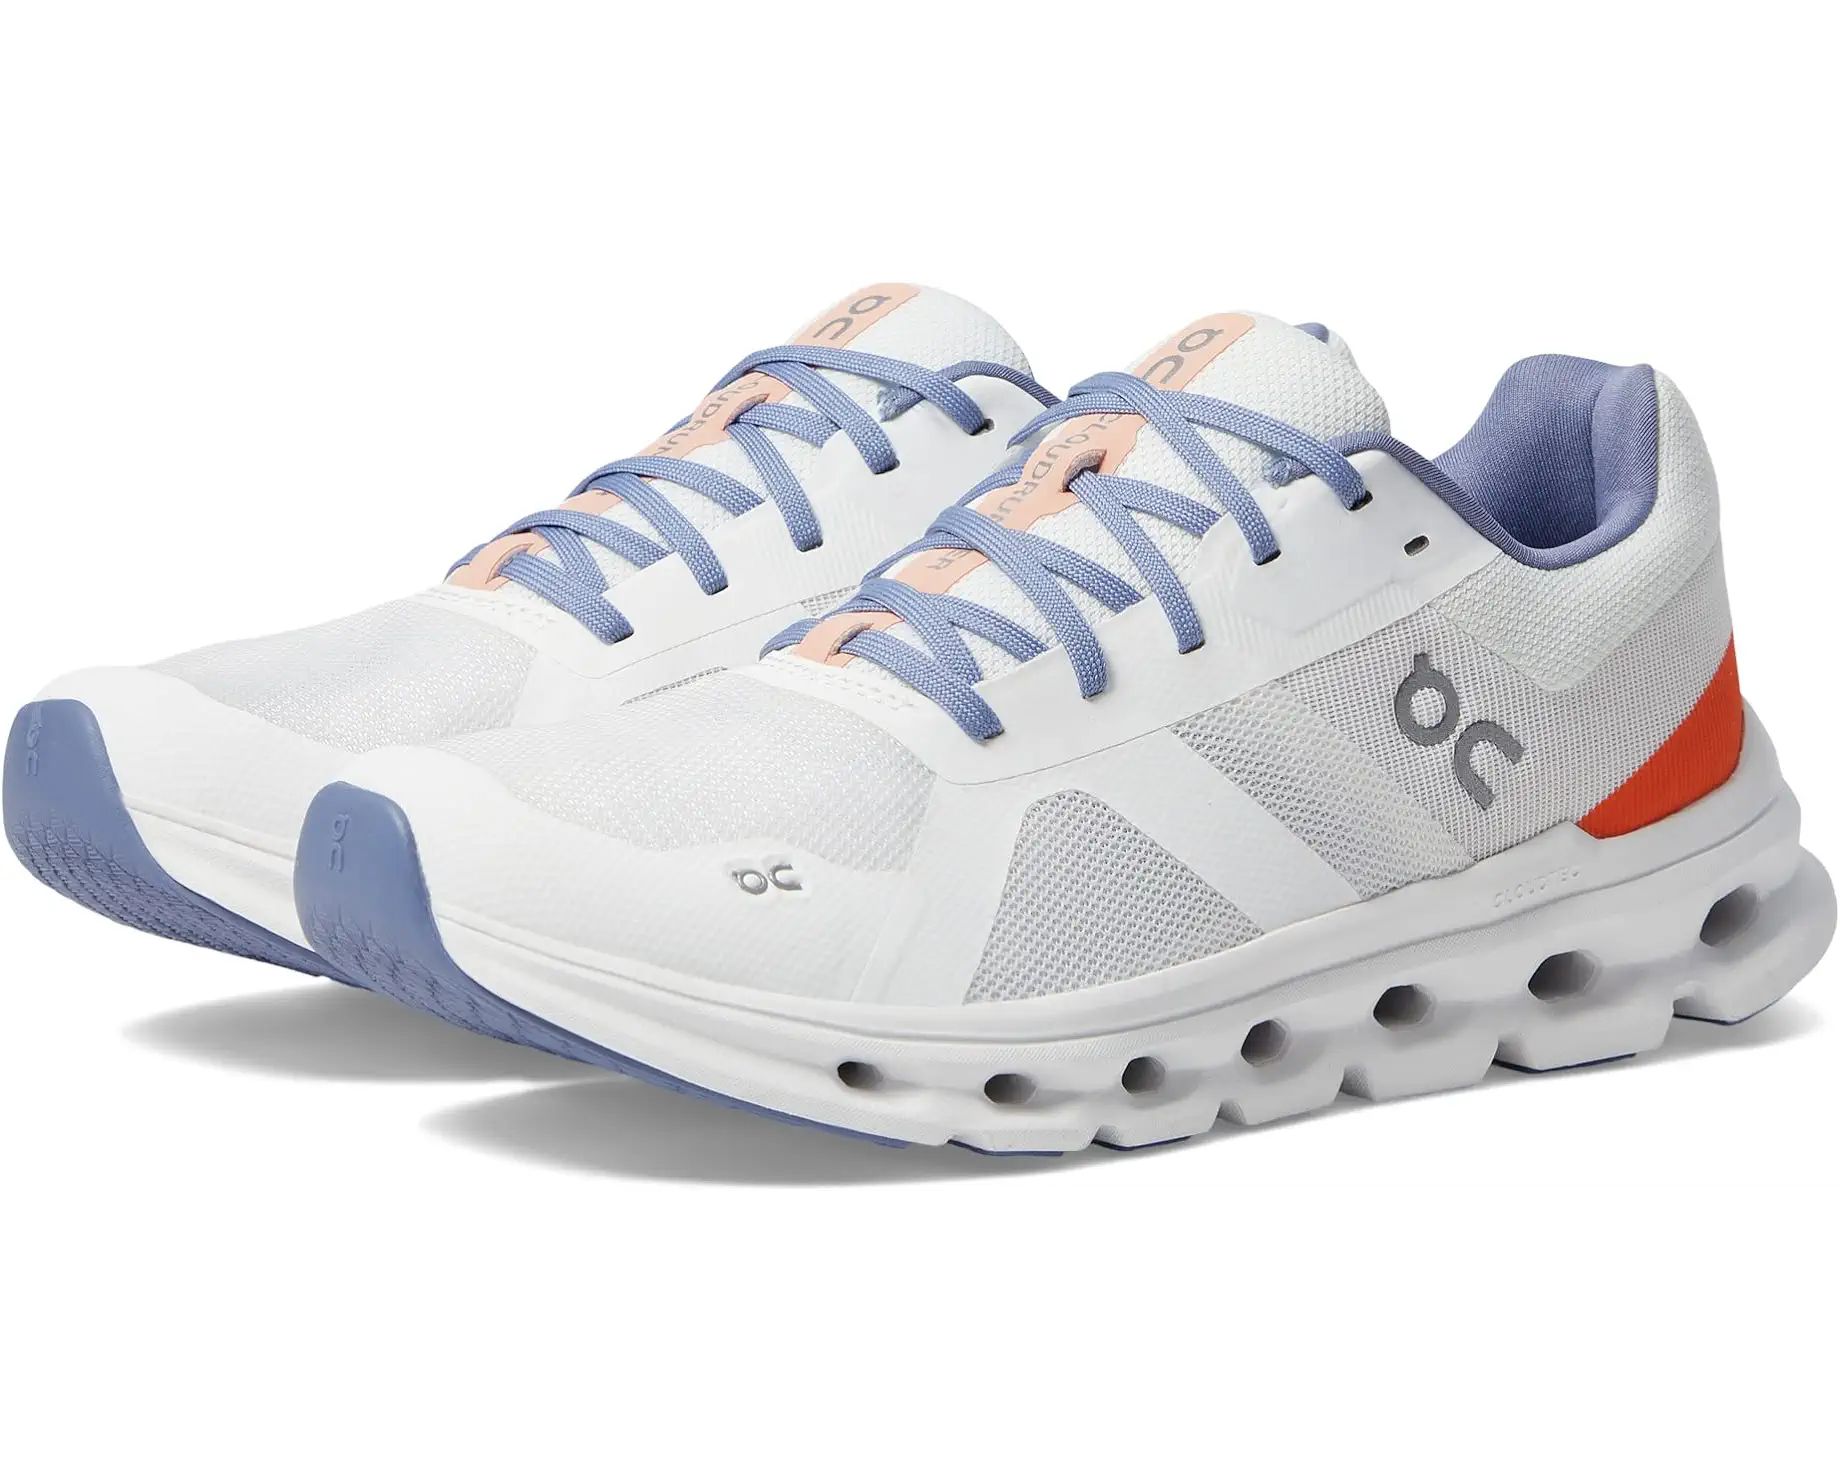 Cloudrunner | Zappos